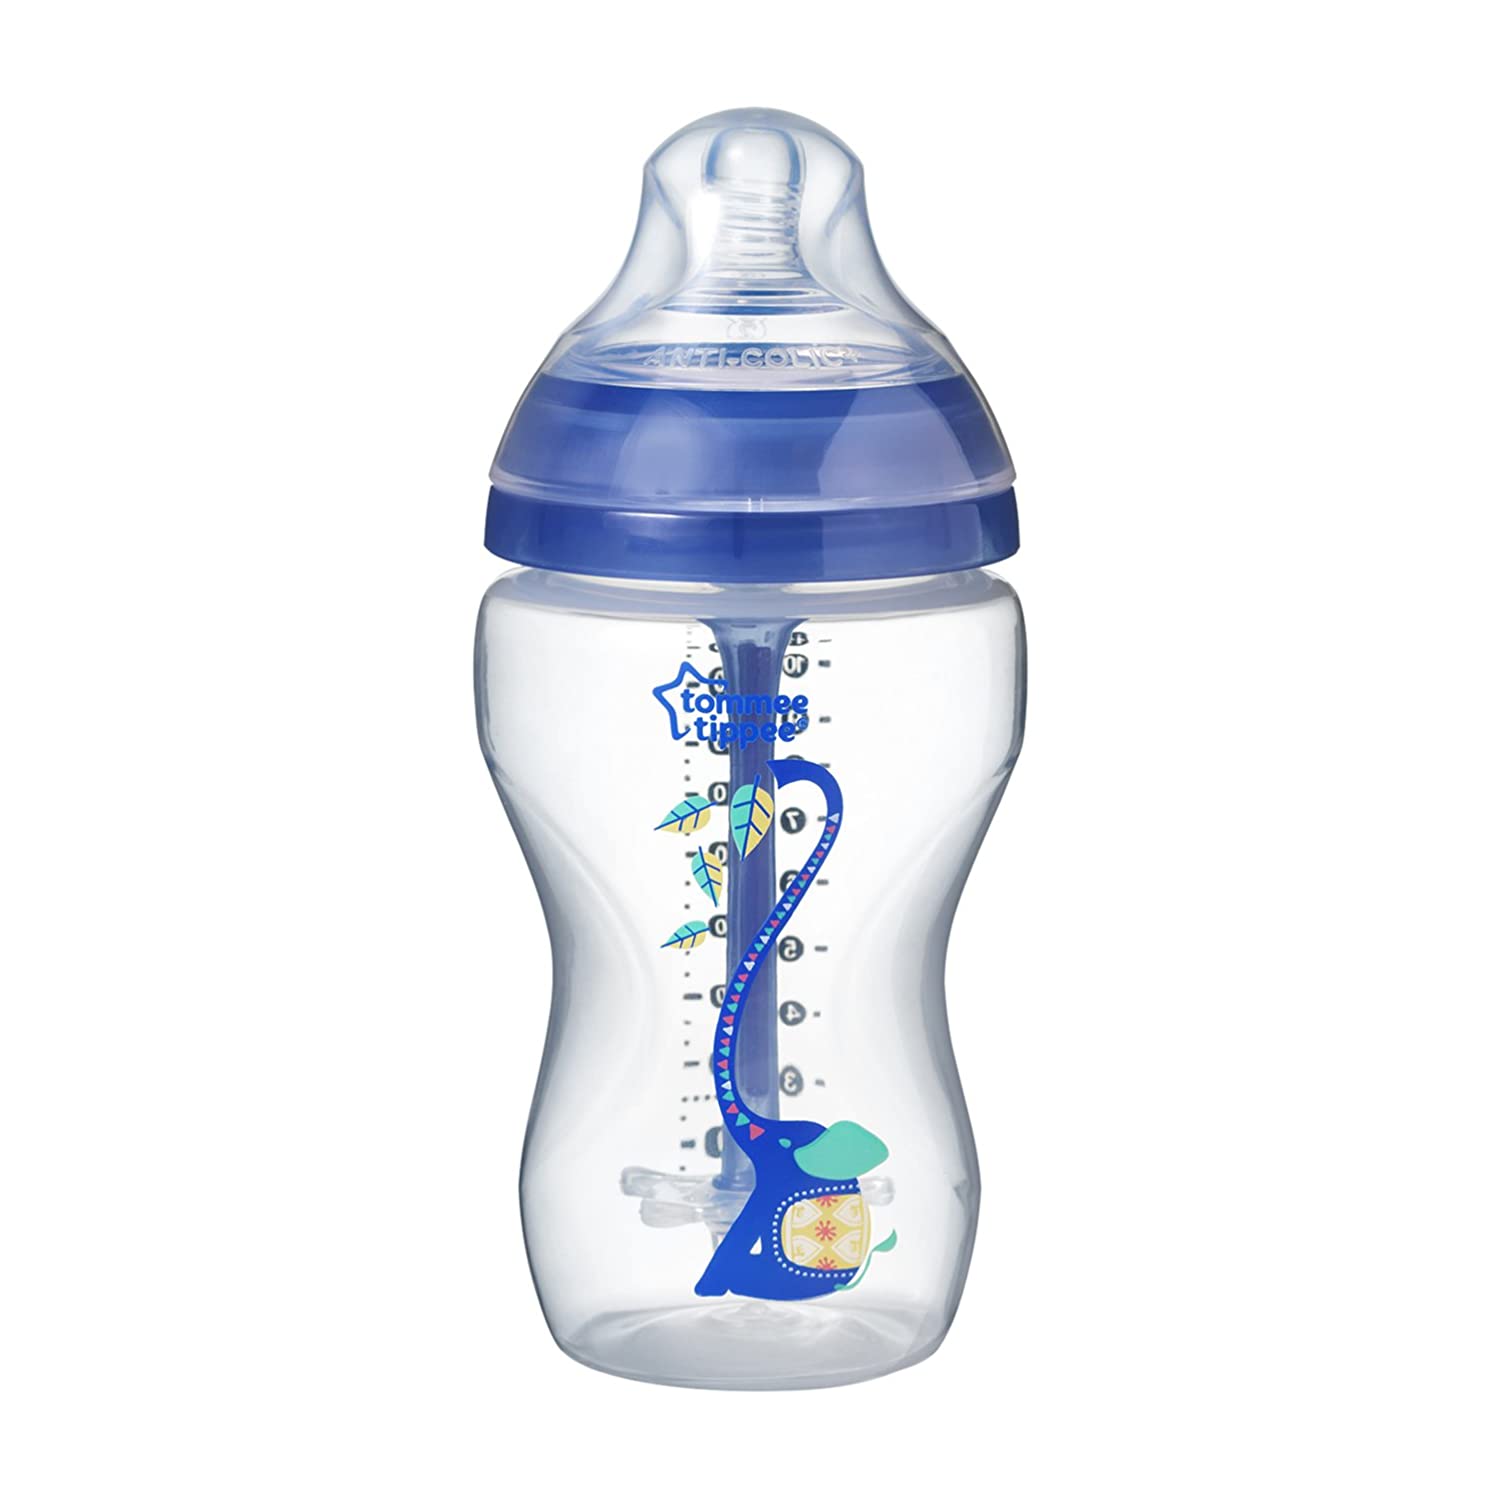 Tommee Tippee Advanced Anti-Colic Baby Bottle Super Soft Teat, 3+ Months, 340 ml, Blue with Decorations